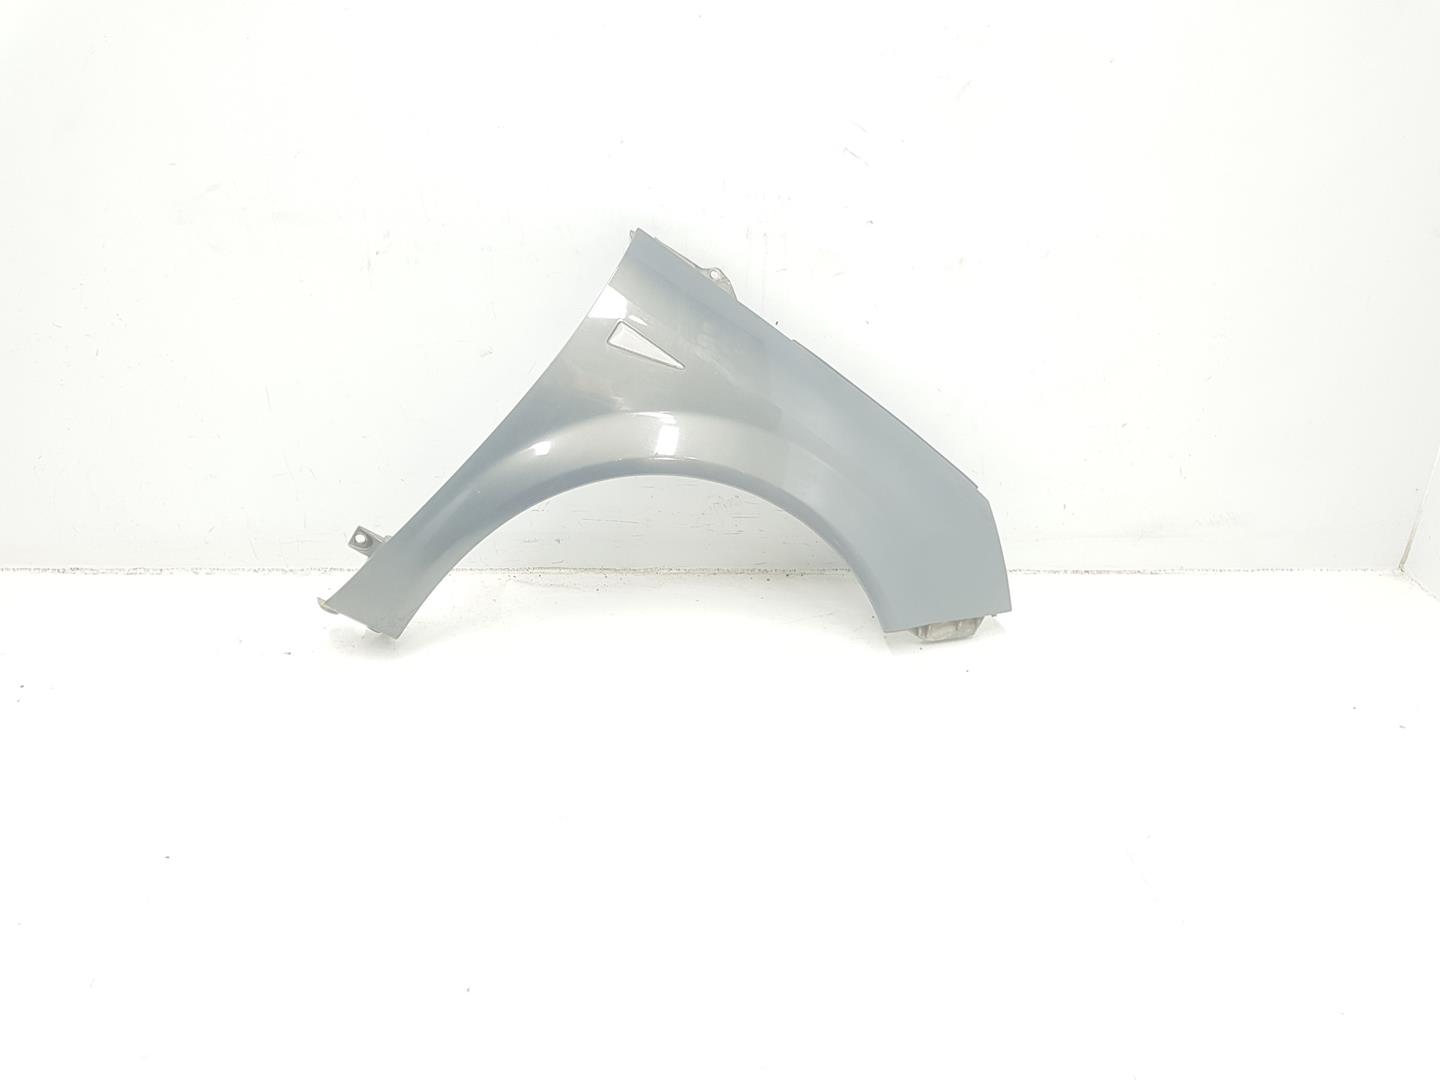 RENAULT Scenic 2 generation (2003-2010) Front Right Fender 7701474853, 7701474853, COLORGRISOSCURO 20869477